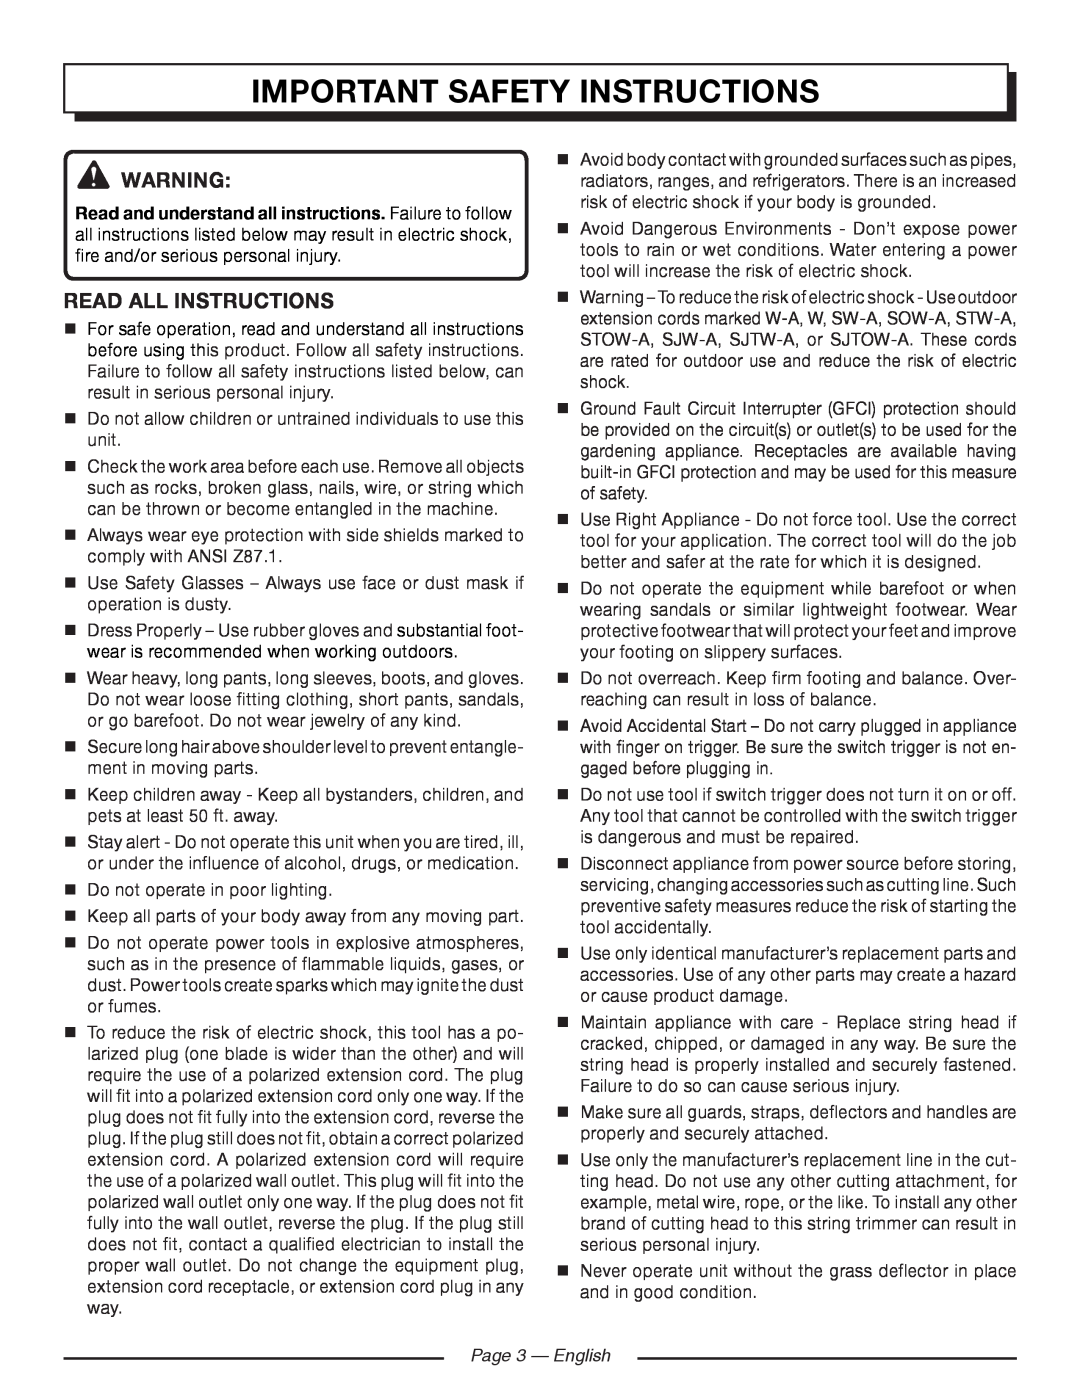 Homelite UT41120 manuel dutilisation Important Safety Instructions, read all instructions, Page 3 - English 